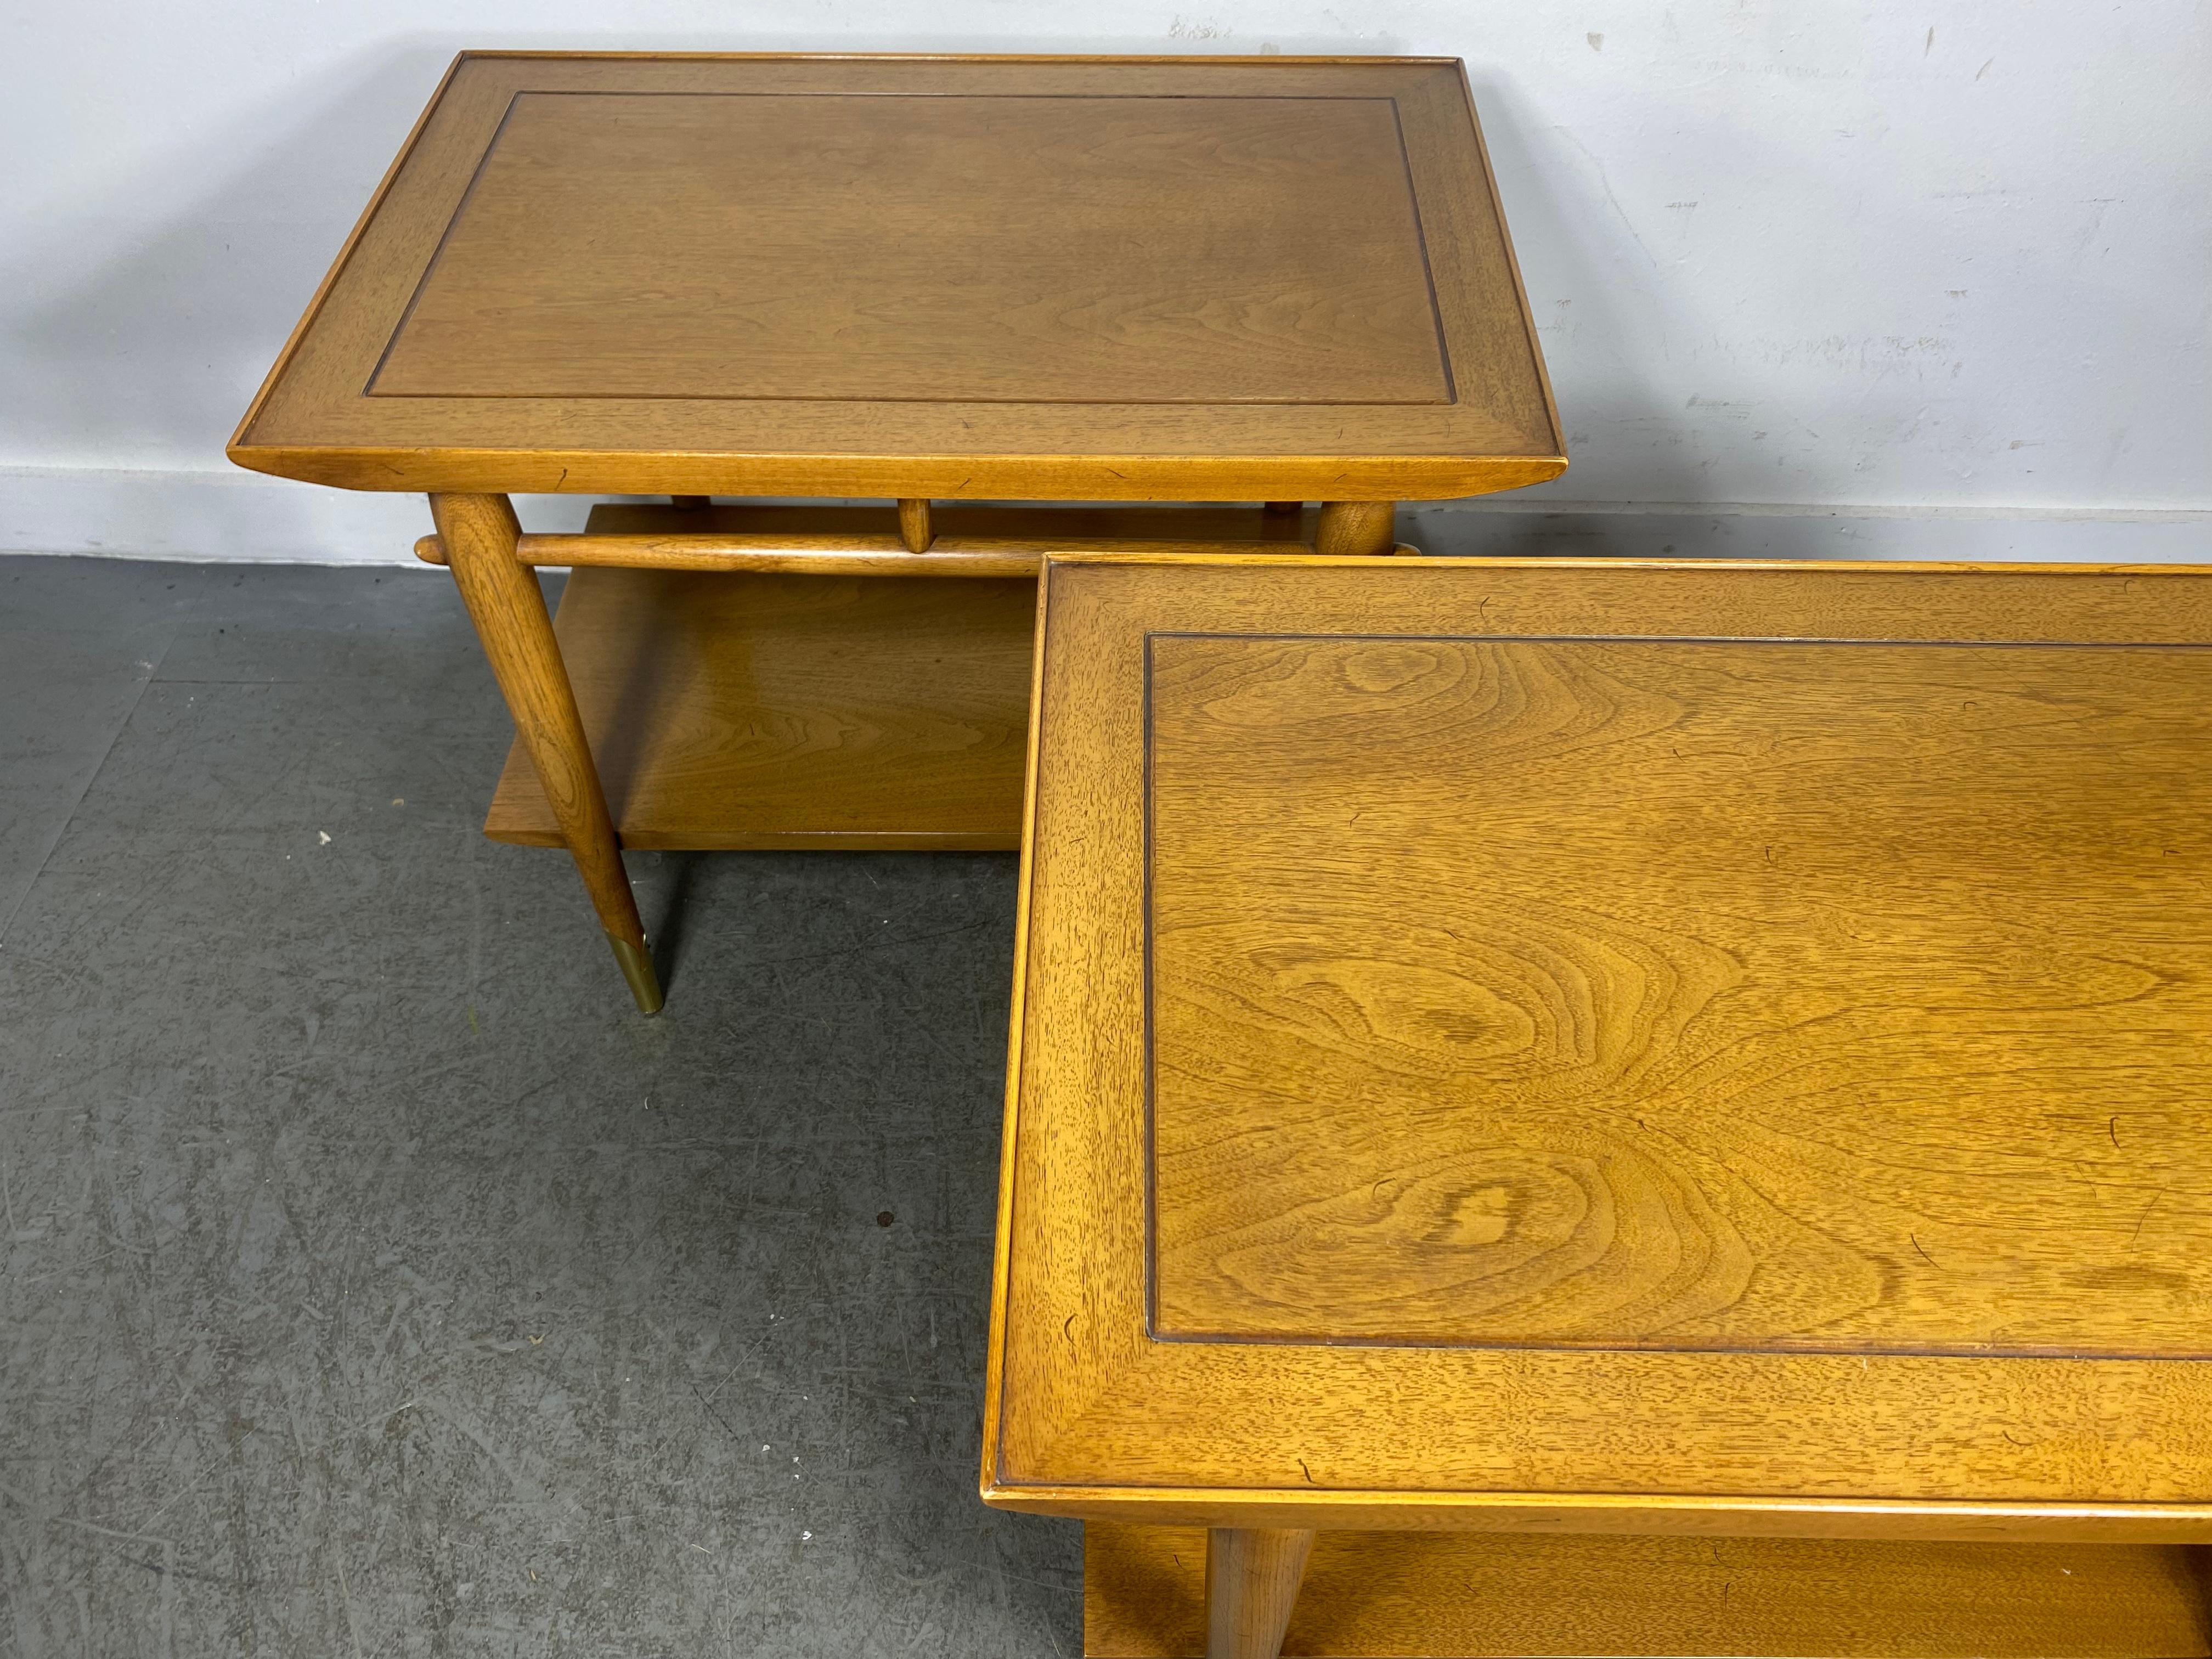 Classic Modern two-tier walnut tables by Lane from the 